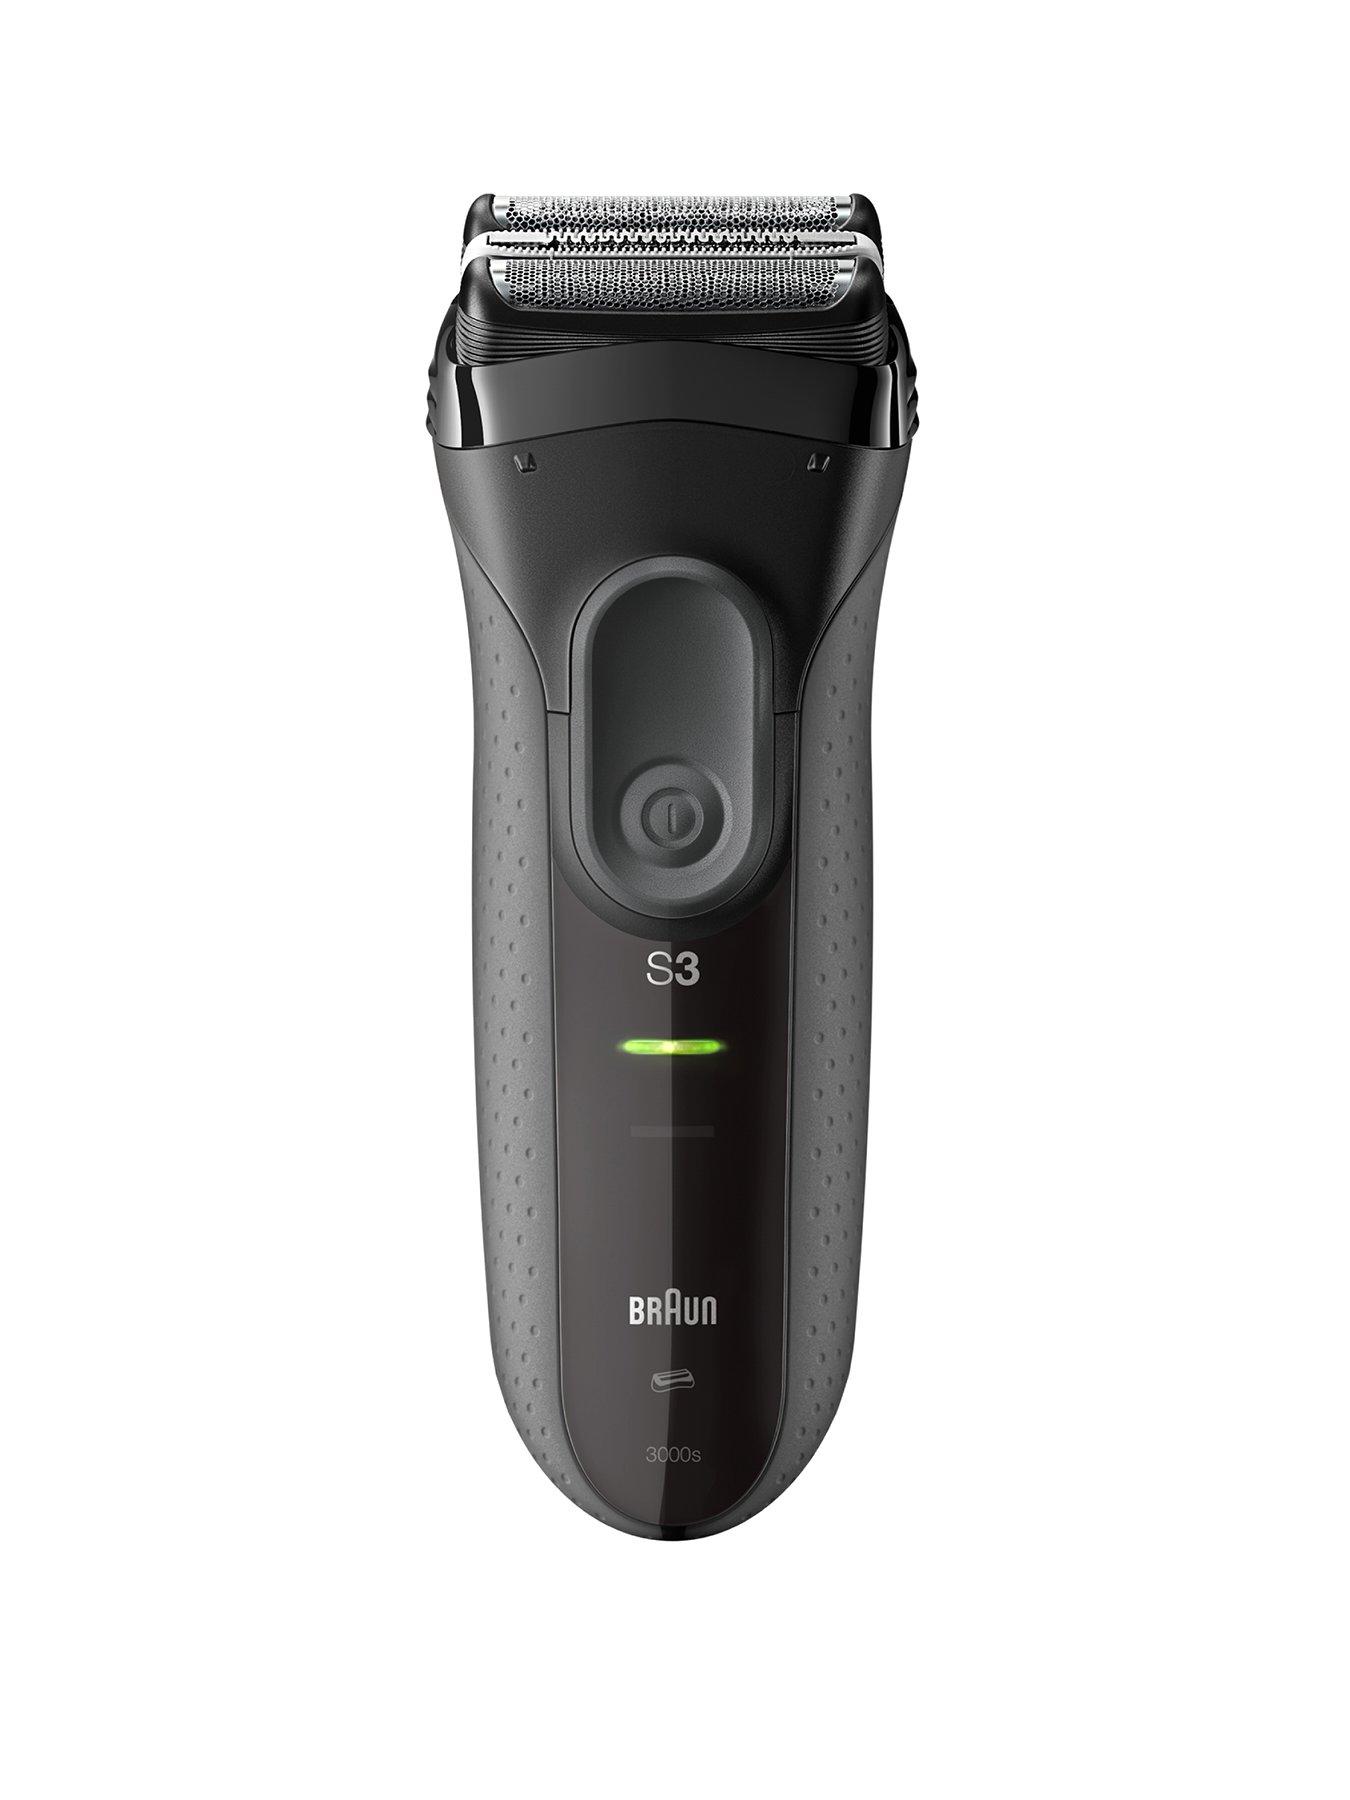 Braun Series 3 ProSkin 3000s Electric Shaver, Black - Rechargeable